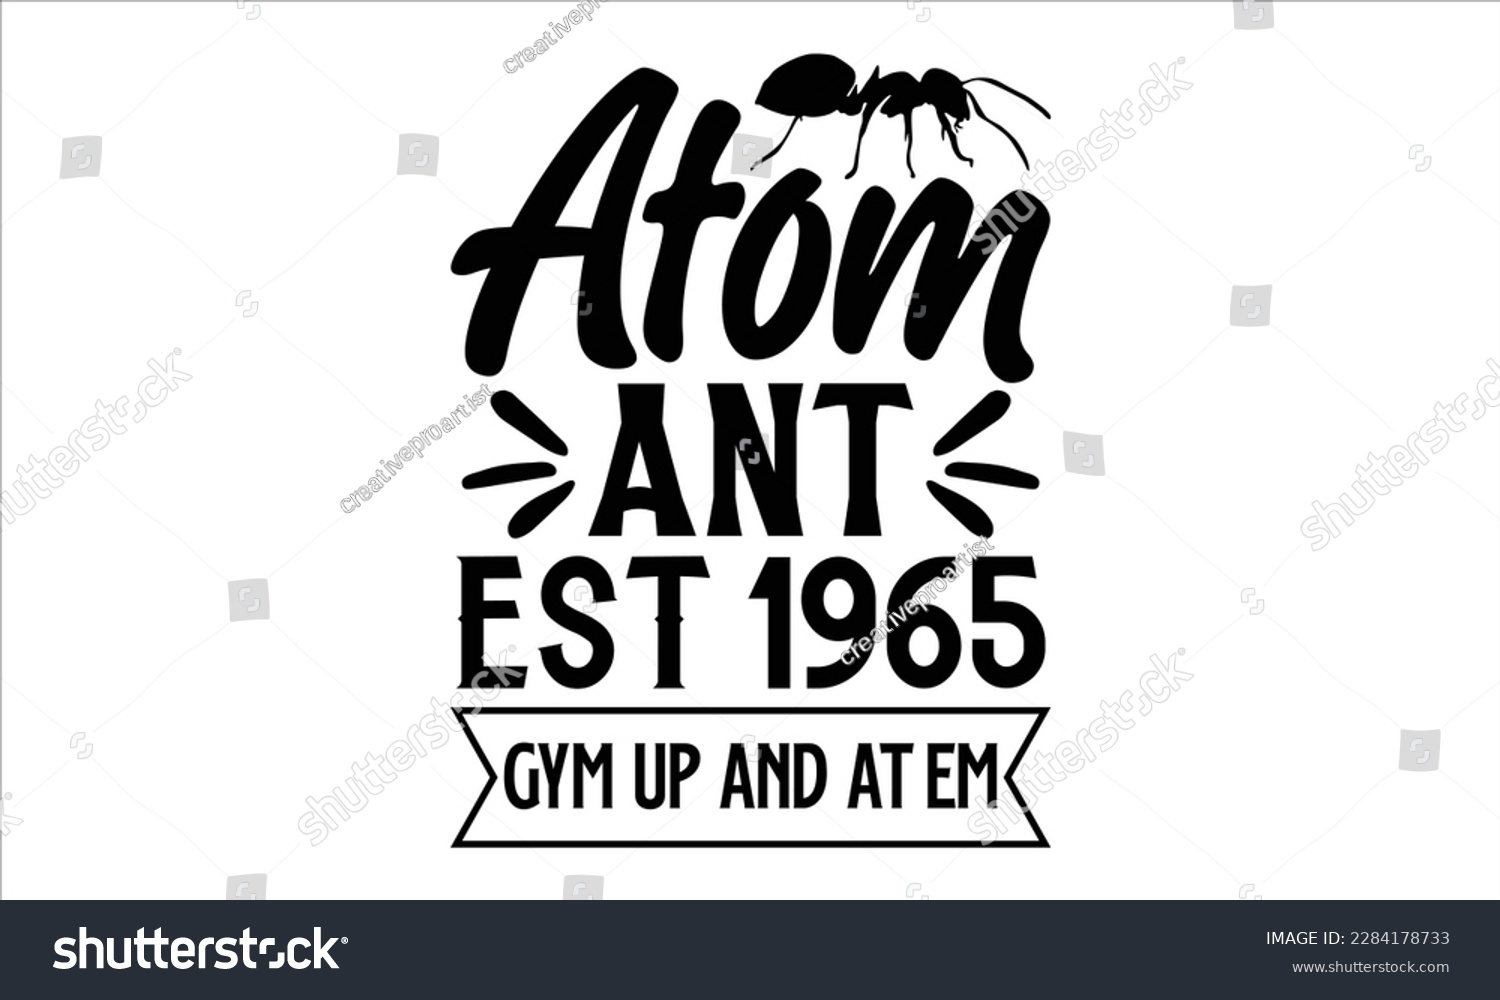 SVG of atom ant est.1965 gym up and at em- Ant svg design, This illustration can be used as a print on and bags, stationary or as a poster, 
greeting card template with typography text. svg